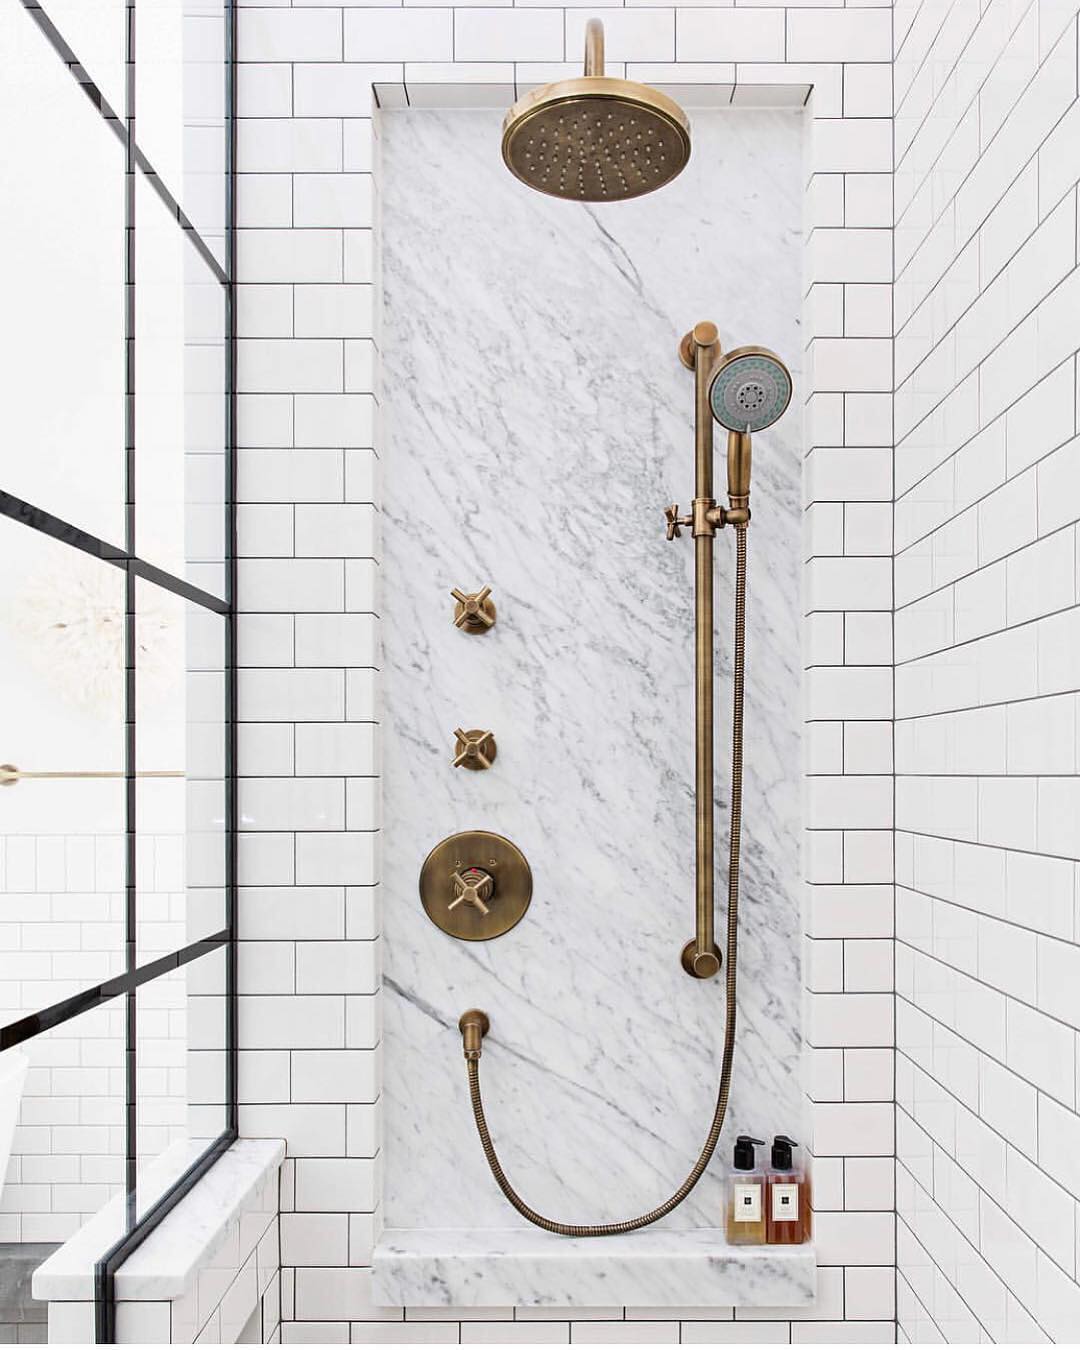 marble shower with gold accessories. Photo via @aprealtyteam